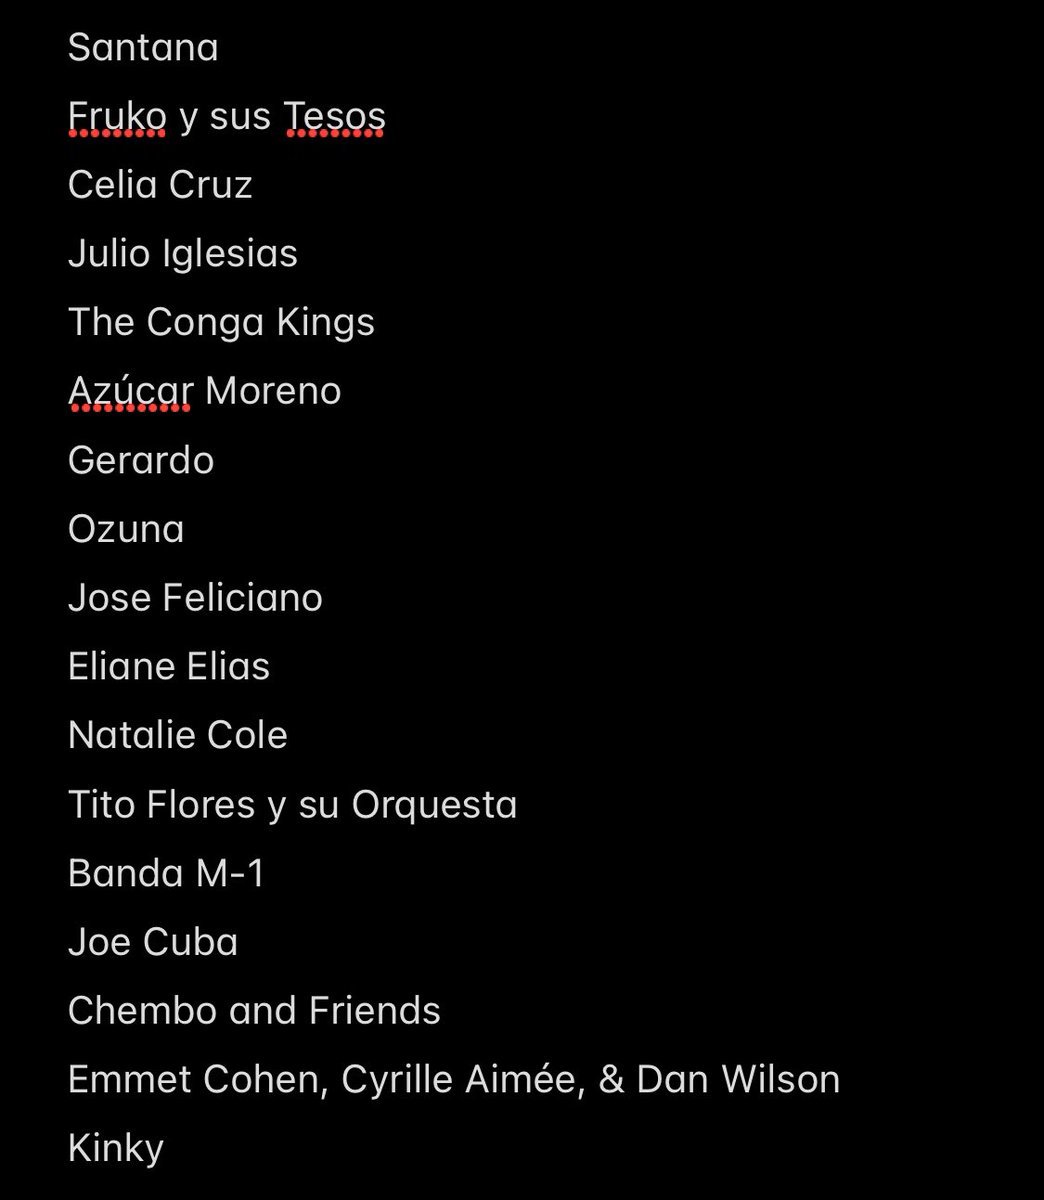 I’m doing an assignment for my ethnomusicology class where I have to listen to as many covers of “Oye Cómo Va” as possible. If you know any that AREN’T by these artists/groups, please let me know.